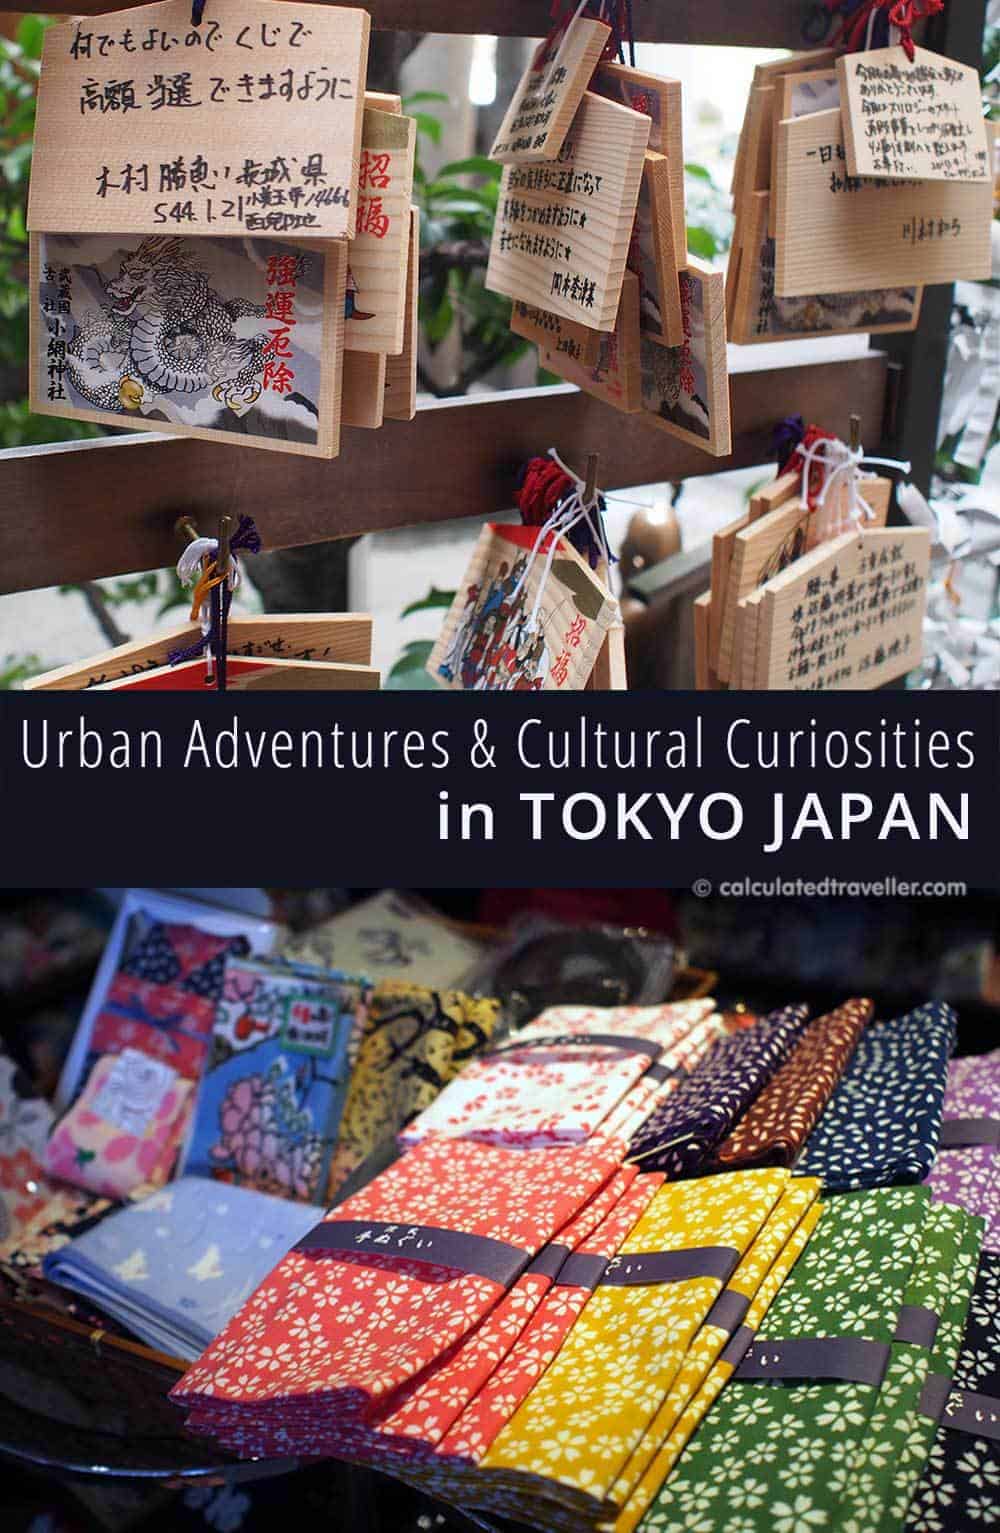 Urban Adventures and Cultural Curiosities in Tokyo Japan - by Calculated Traveller Magazine